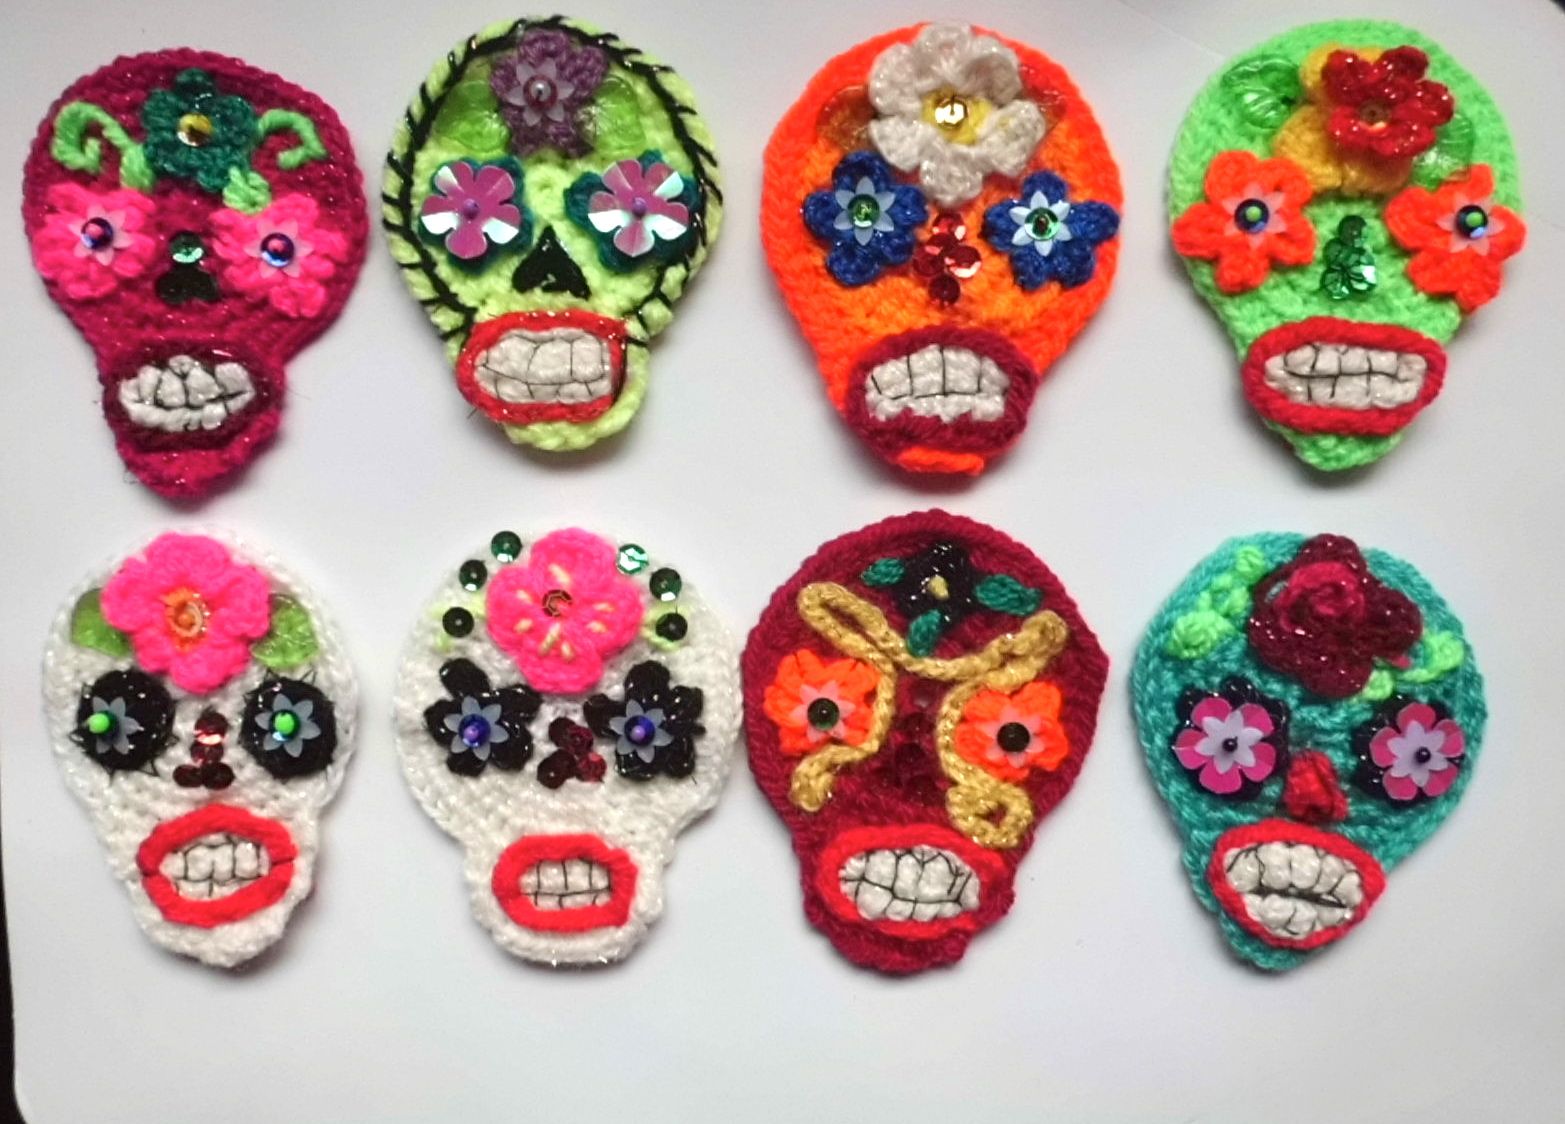 Mexican Candy Skull Face Paint